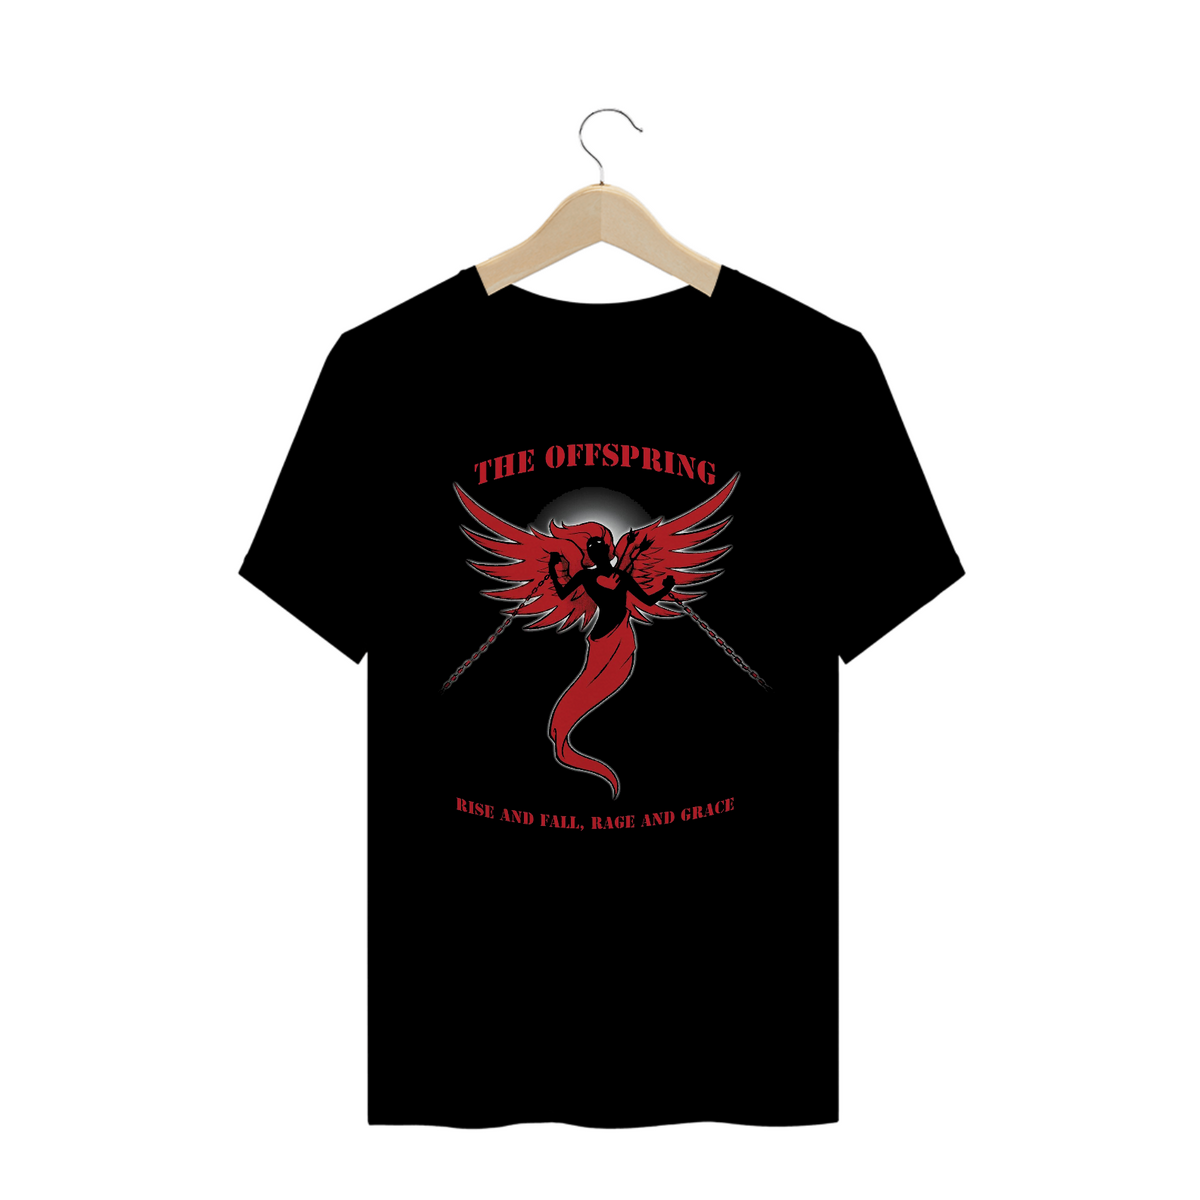 Nome do produto: Camisa The Offspring - Rise and Fall,Rage and Grace